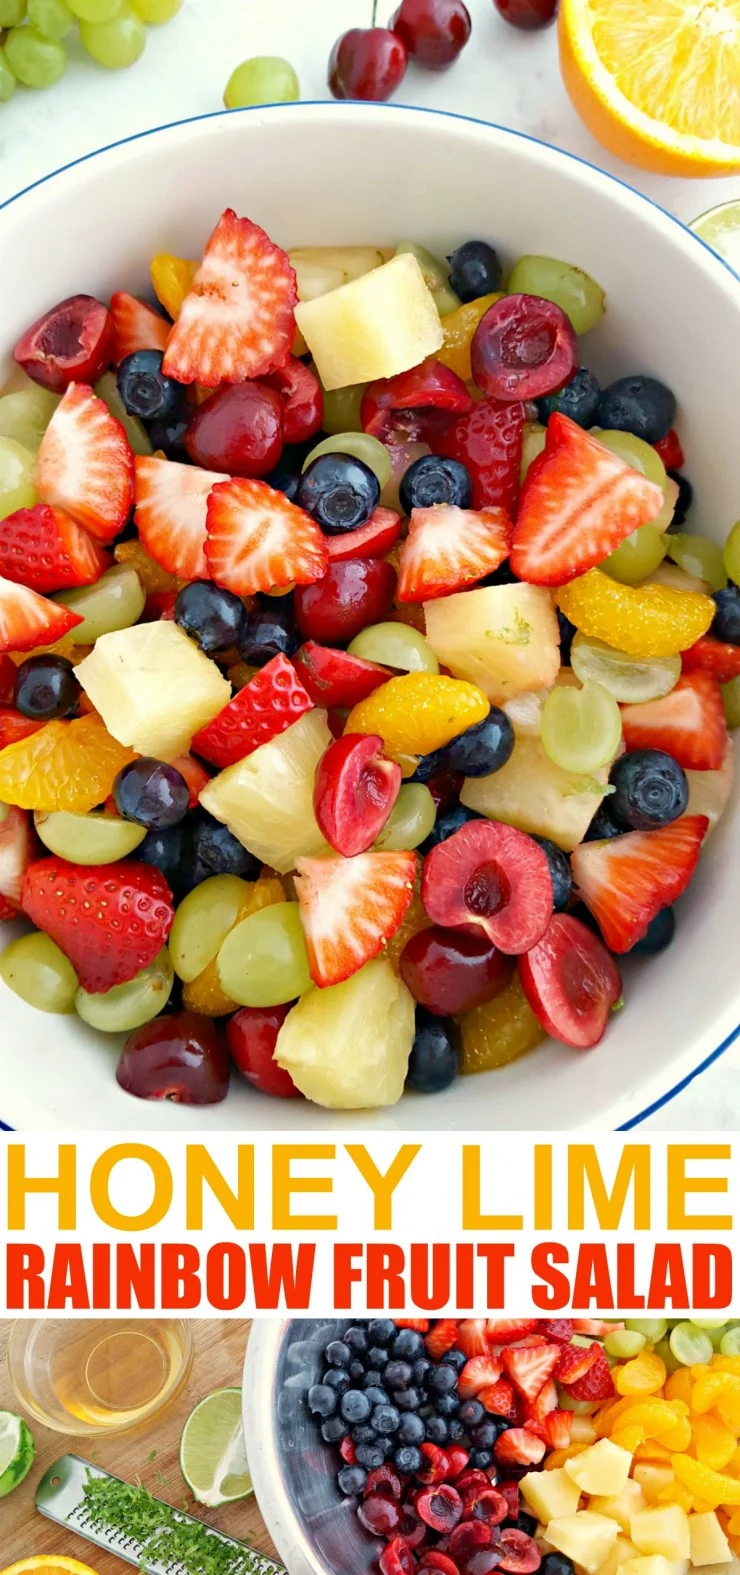 This Honey Lime Rainbow Fruit Salad is a fresh and healthy dessert. Fruit salads are a summer staple and the honey lime dressing on this fruit salad is absolute perfection.